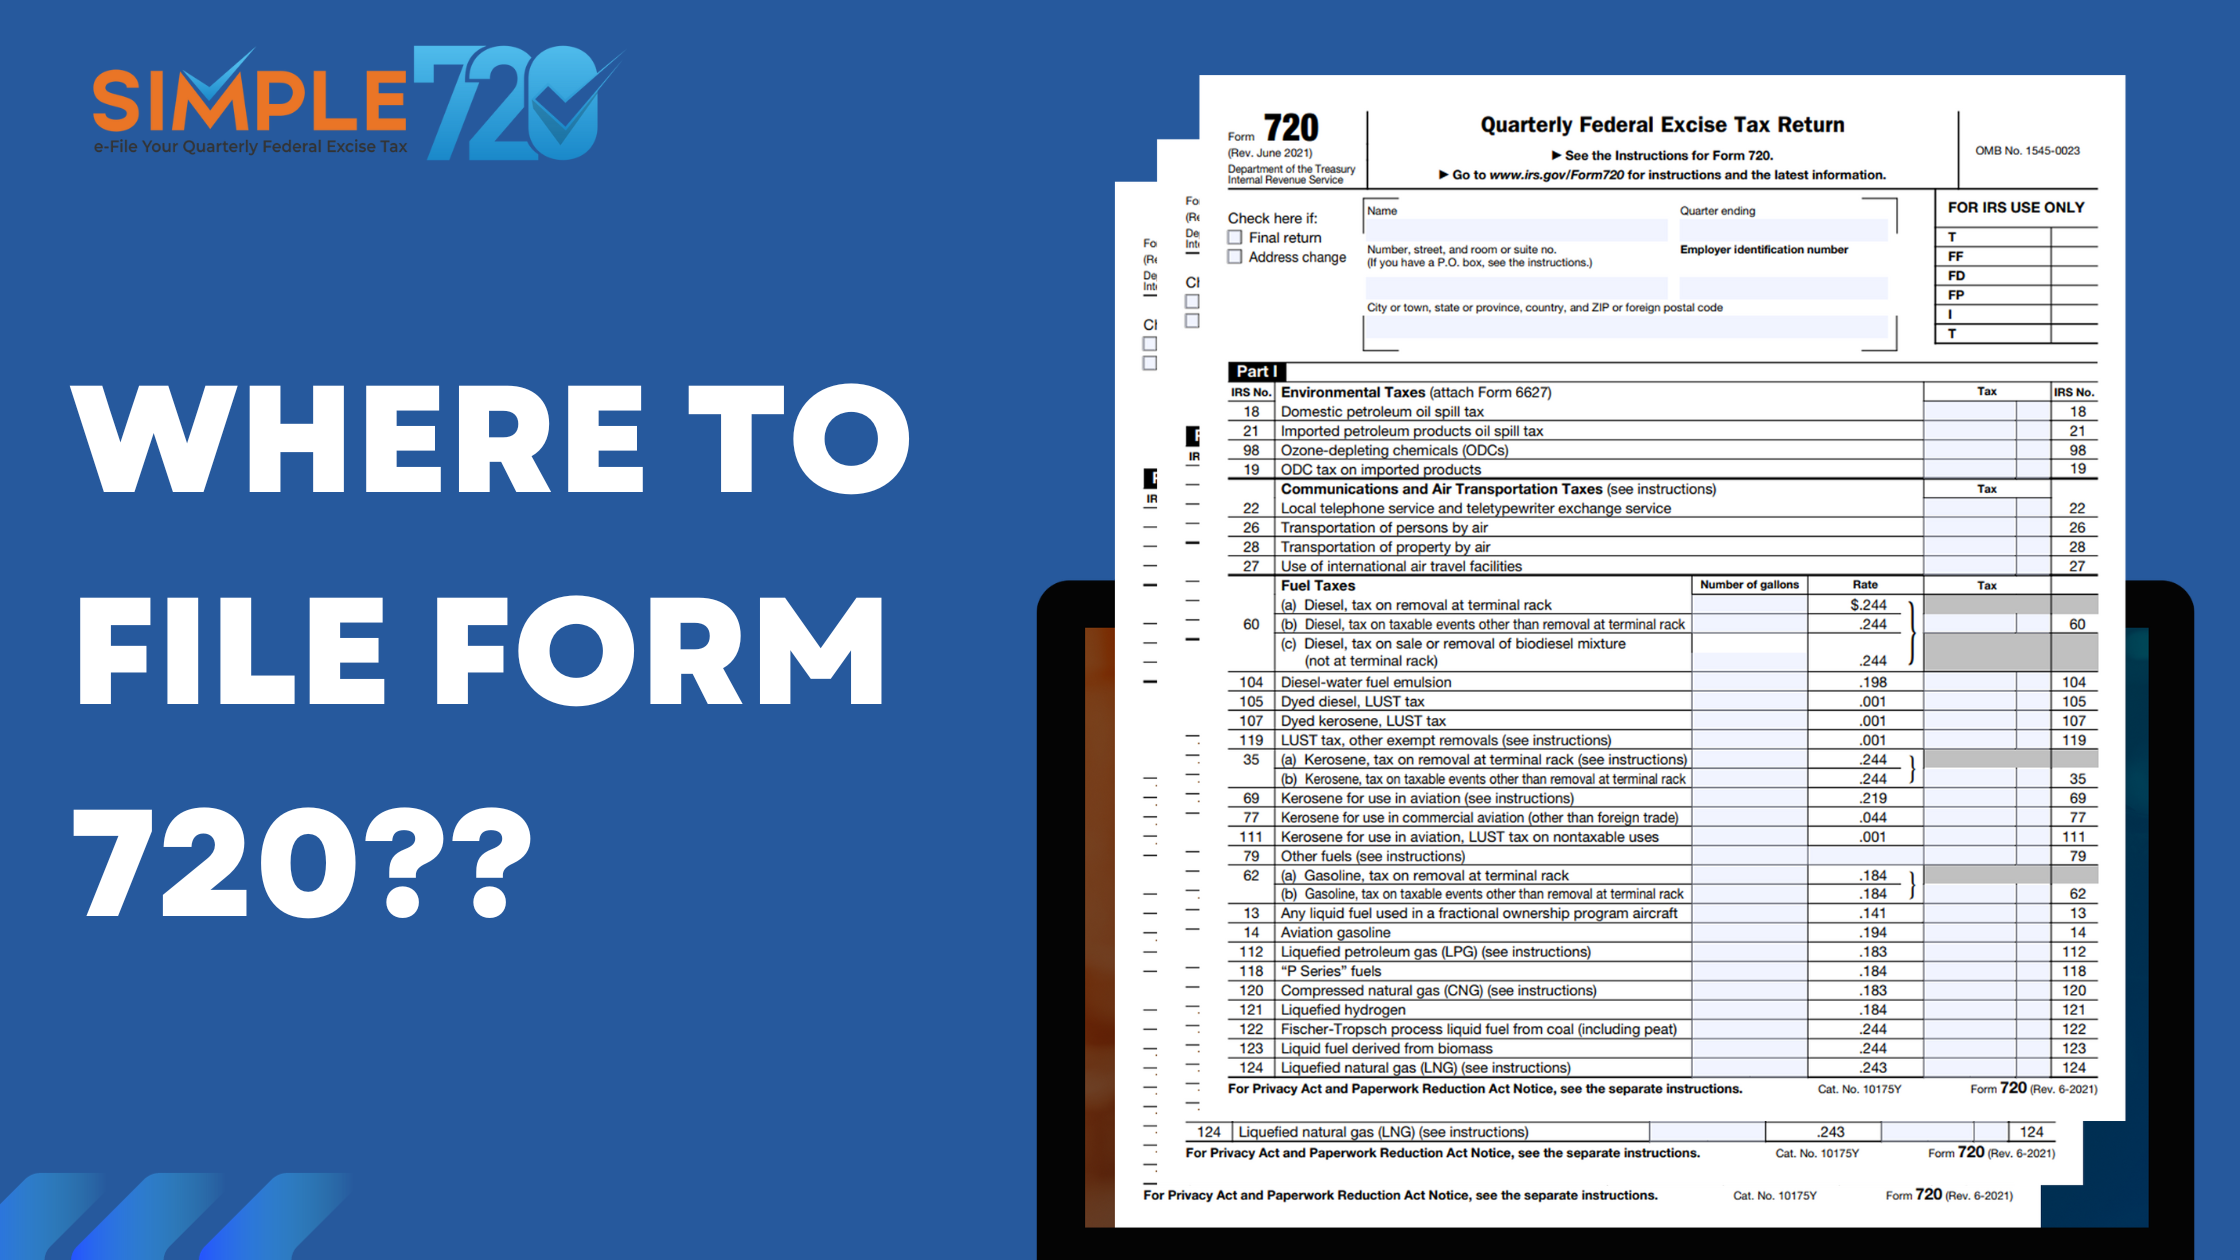 Where to File Form 720 this quarter - The Clear Guide